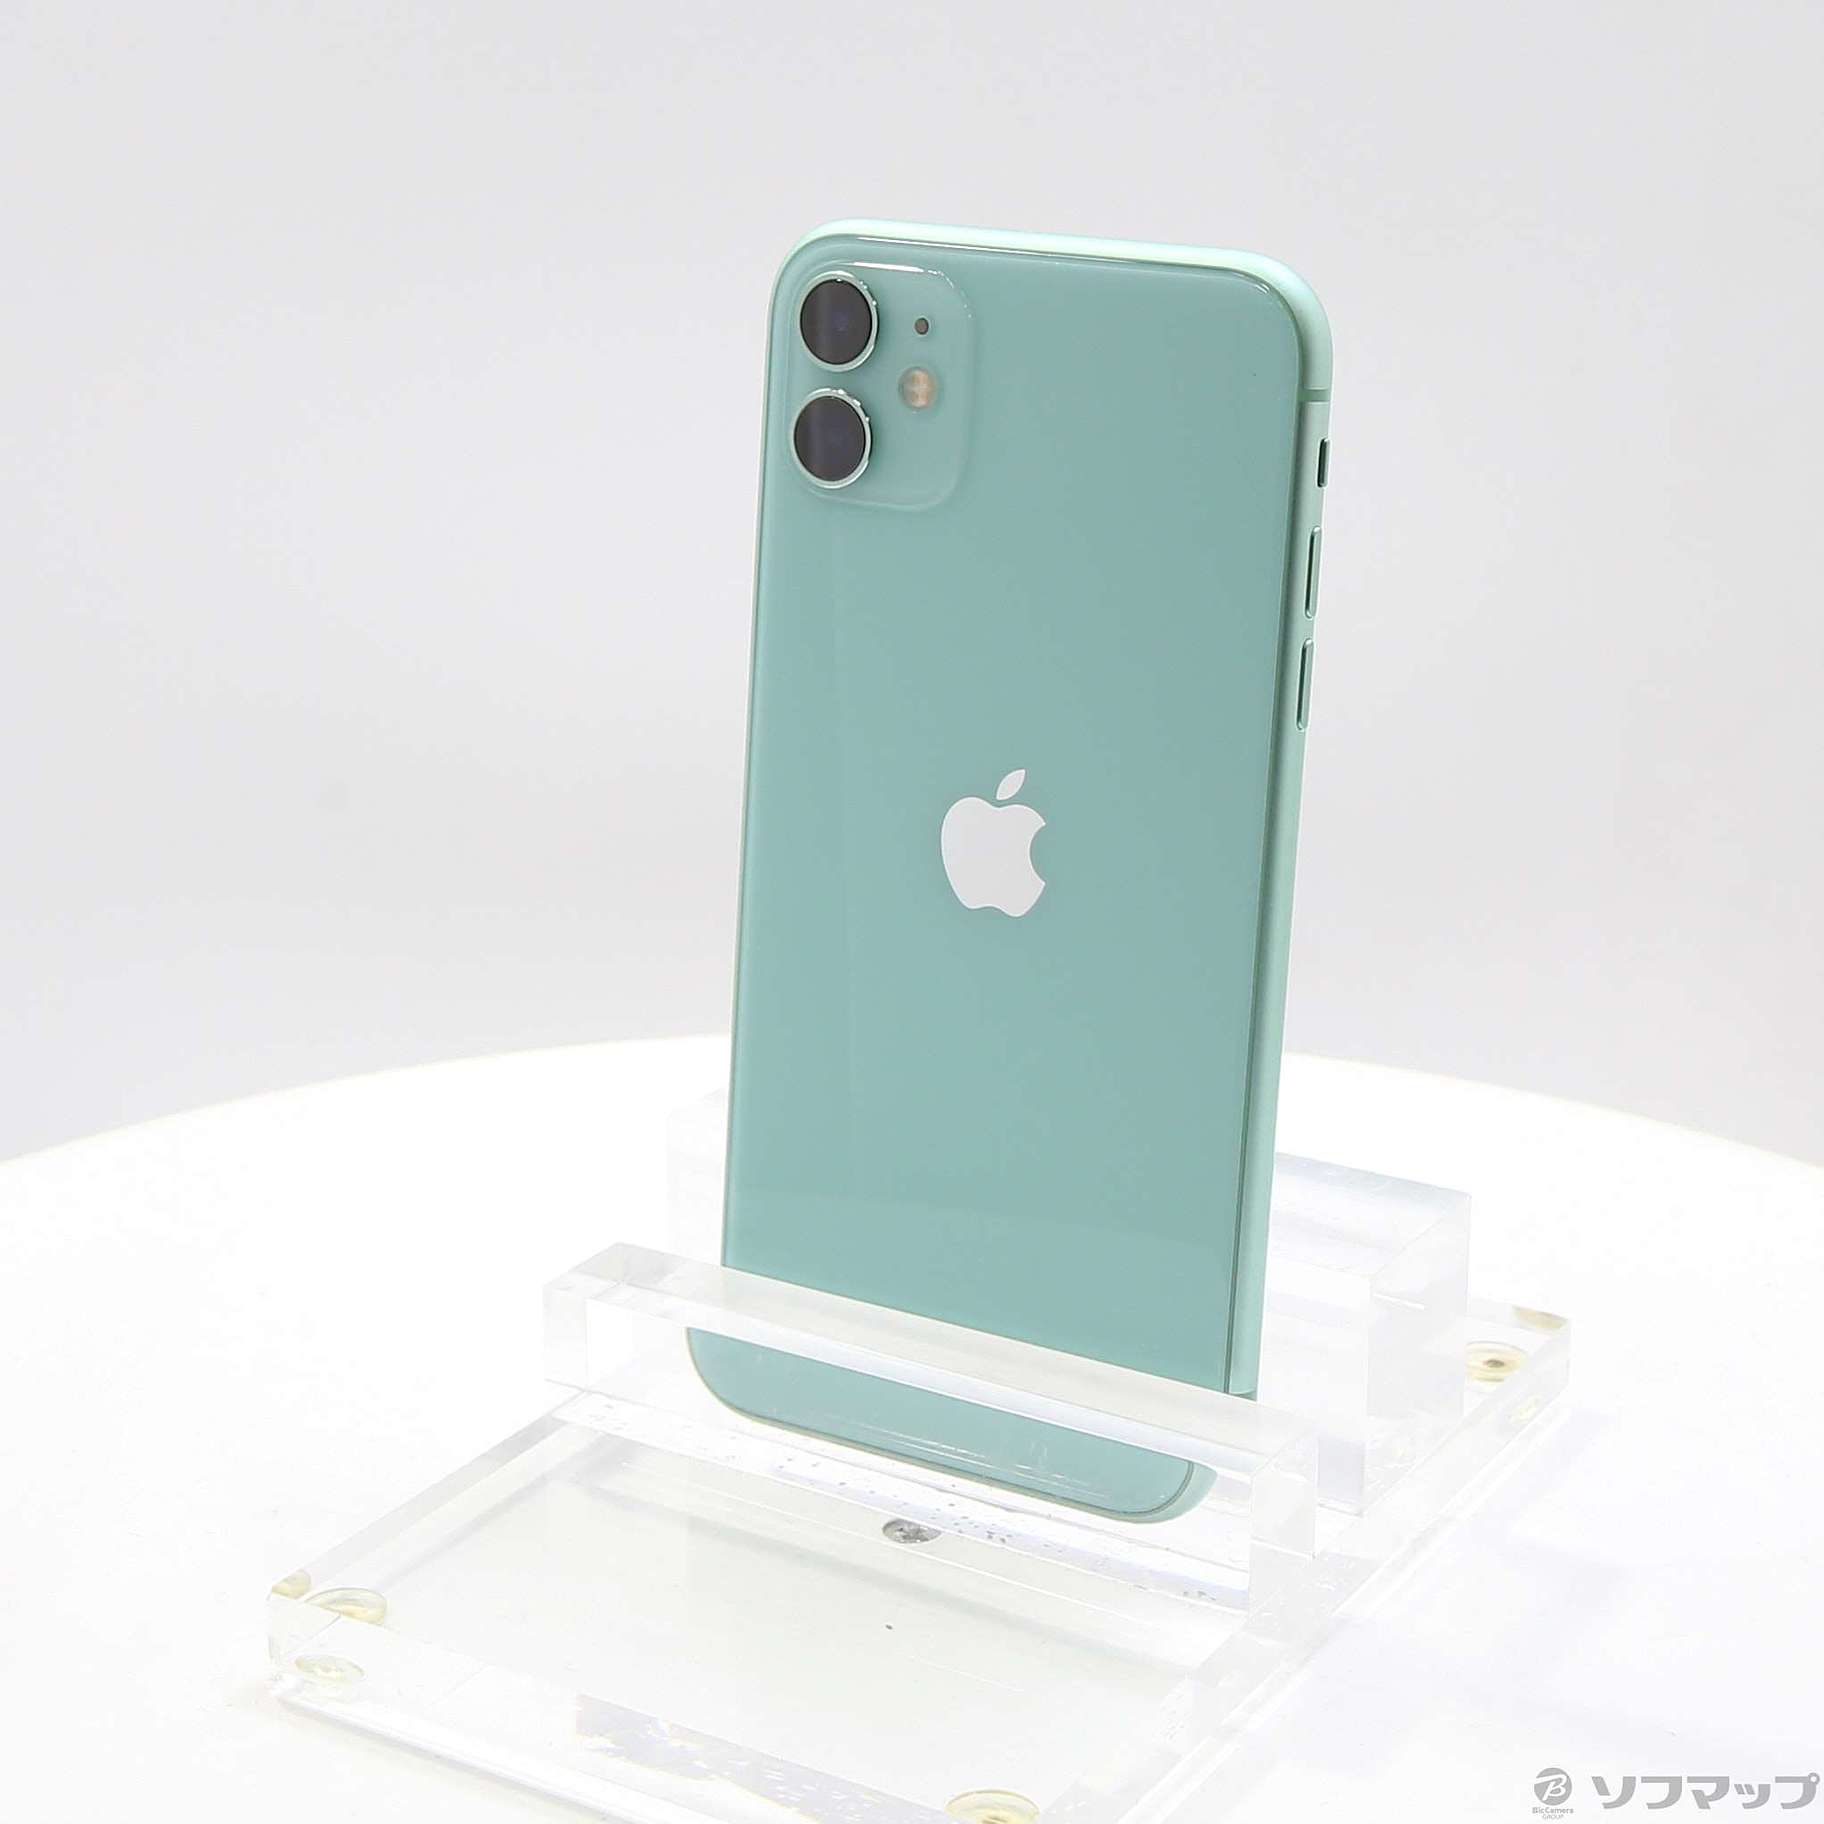 iPhone 11 グリーン 128GB | camillevieraservices.com